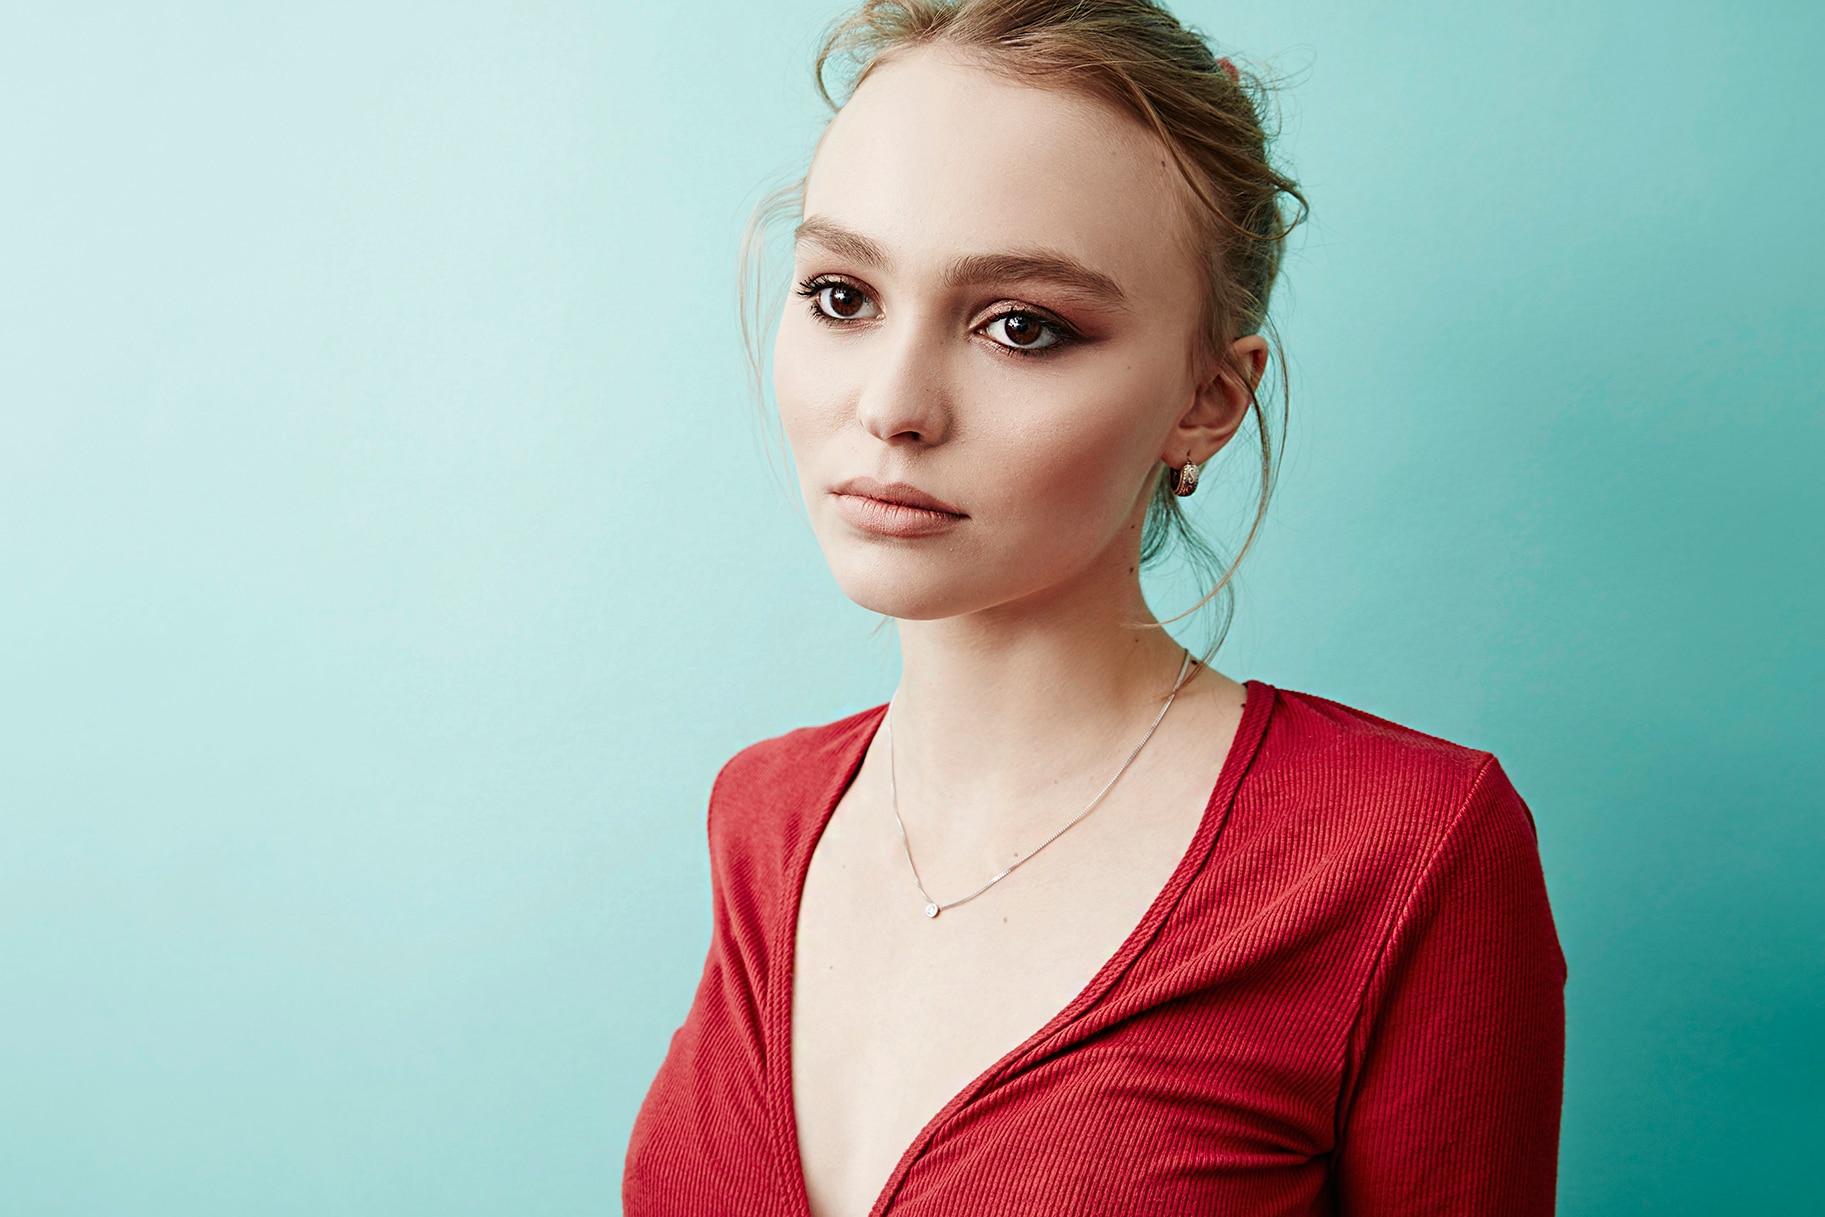 Lily-Rose Depp Chanel No. 5 style